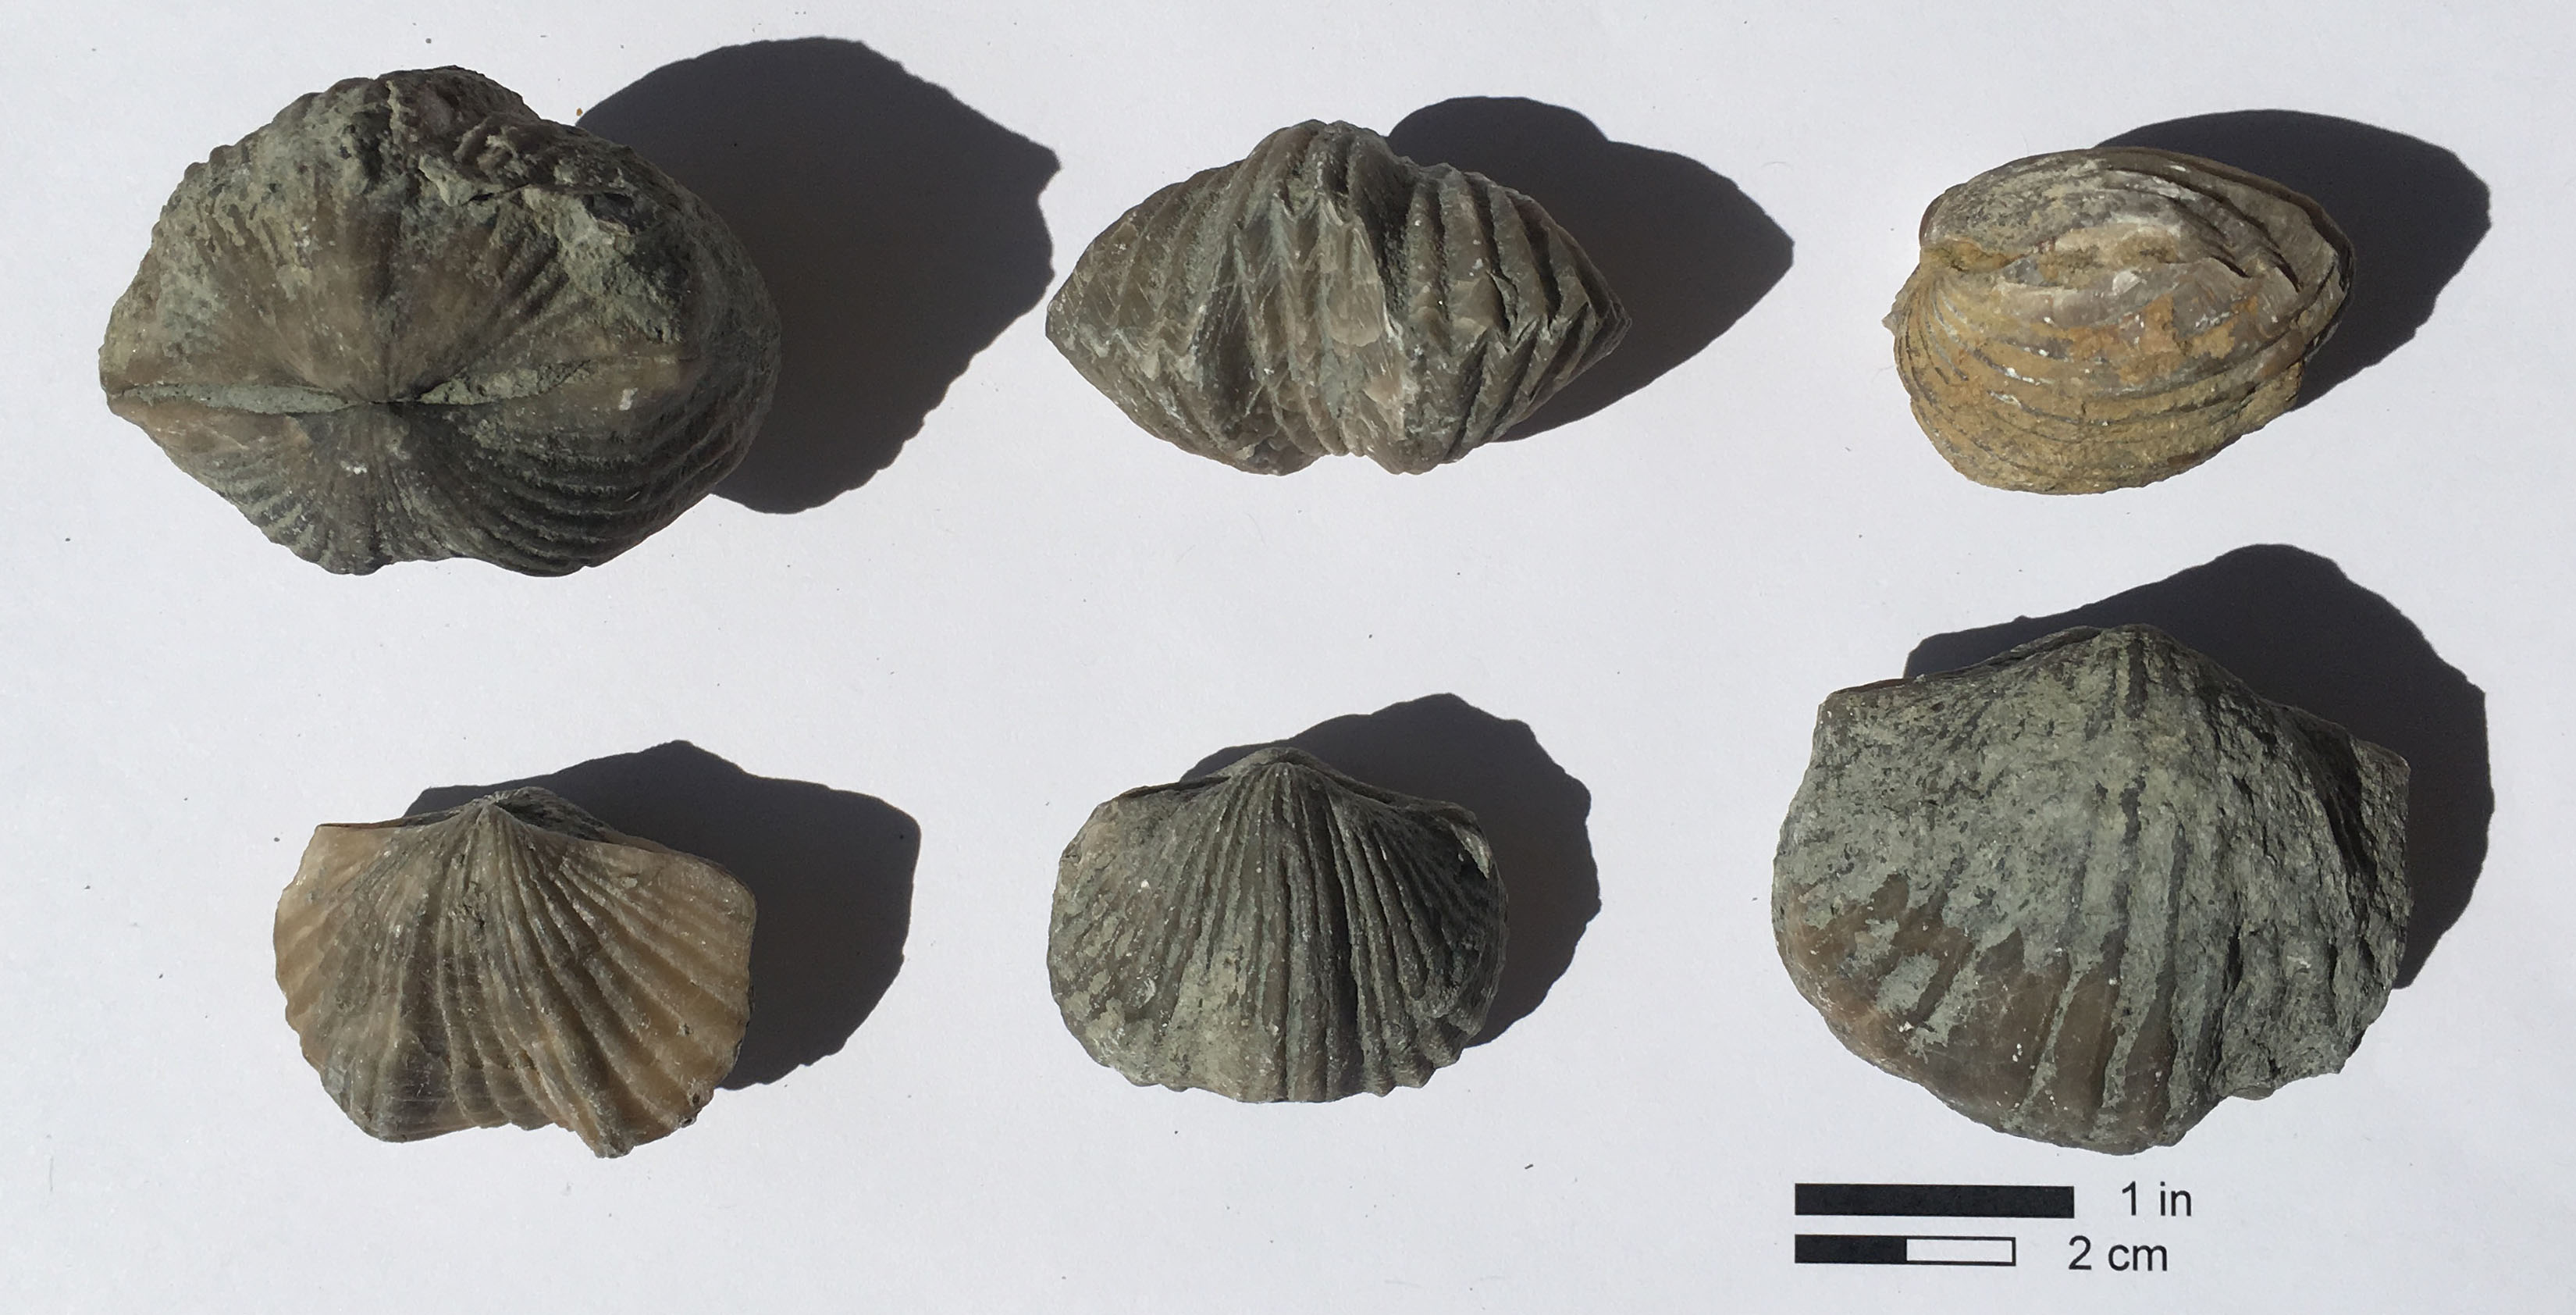 Different views of the brachiopod Vinlandostrophia ponderosa from the Grant Lake Limestone, Simpsonville area, central Kentucky, KGS collections. 